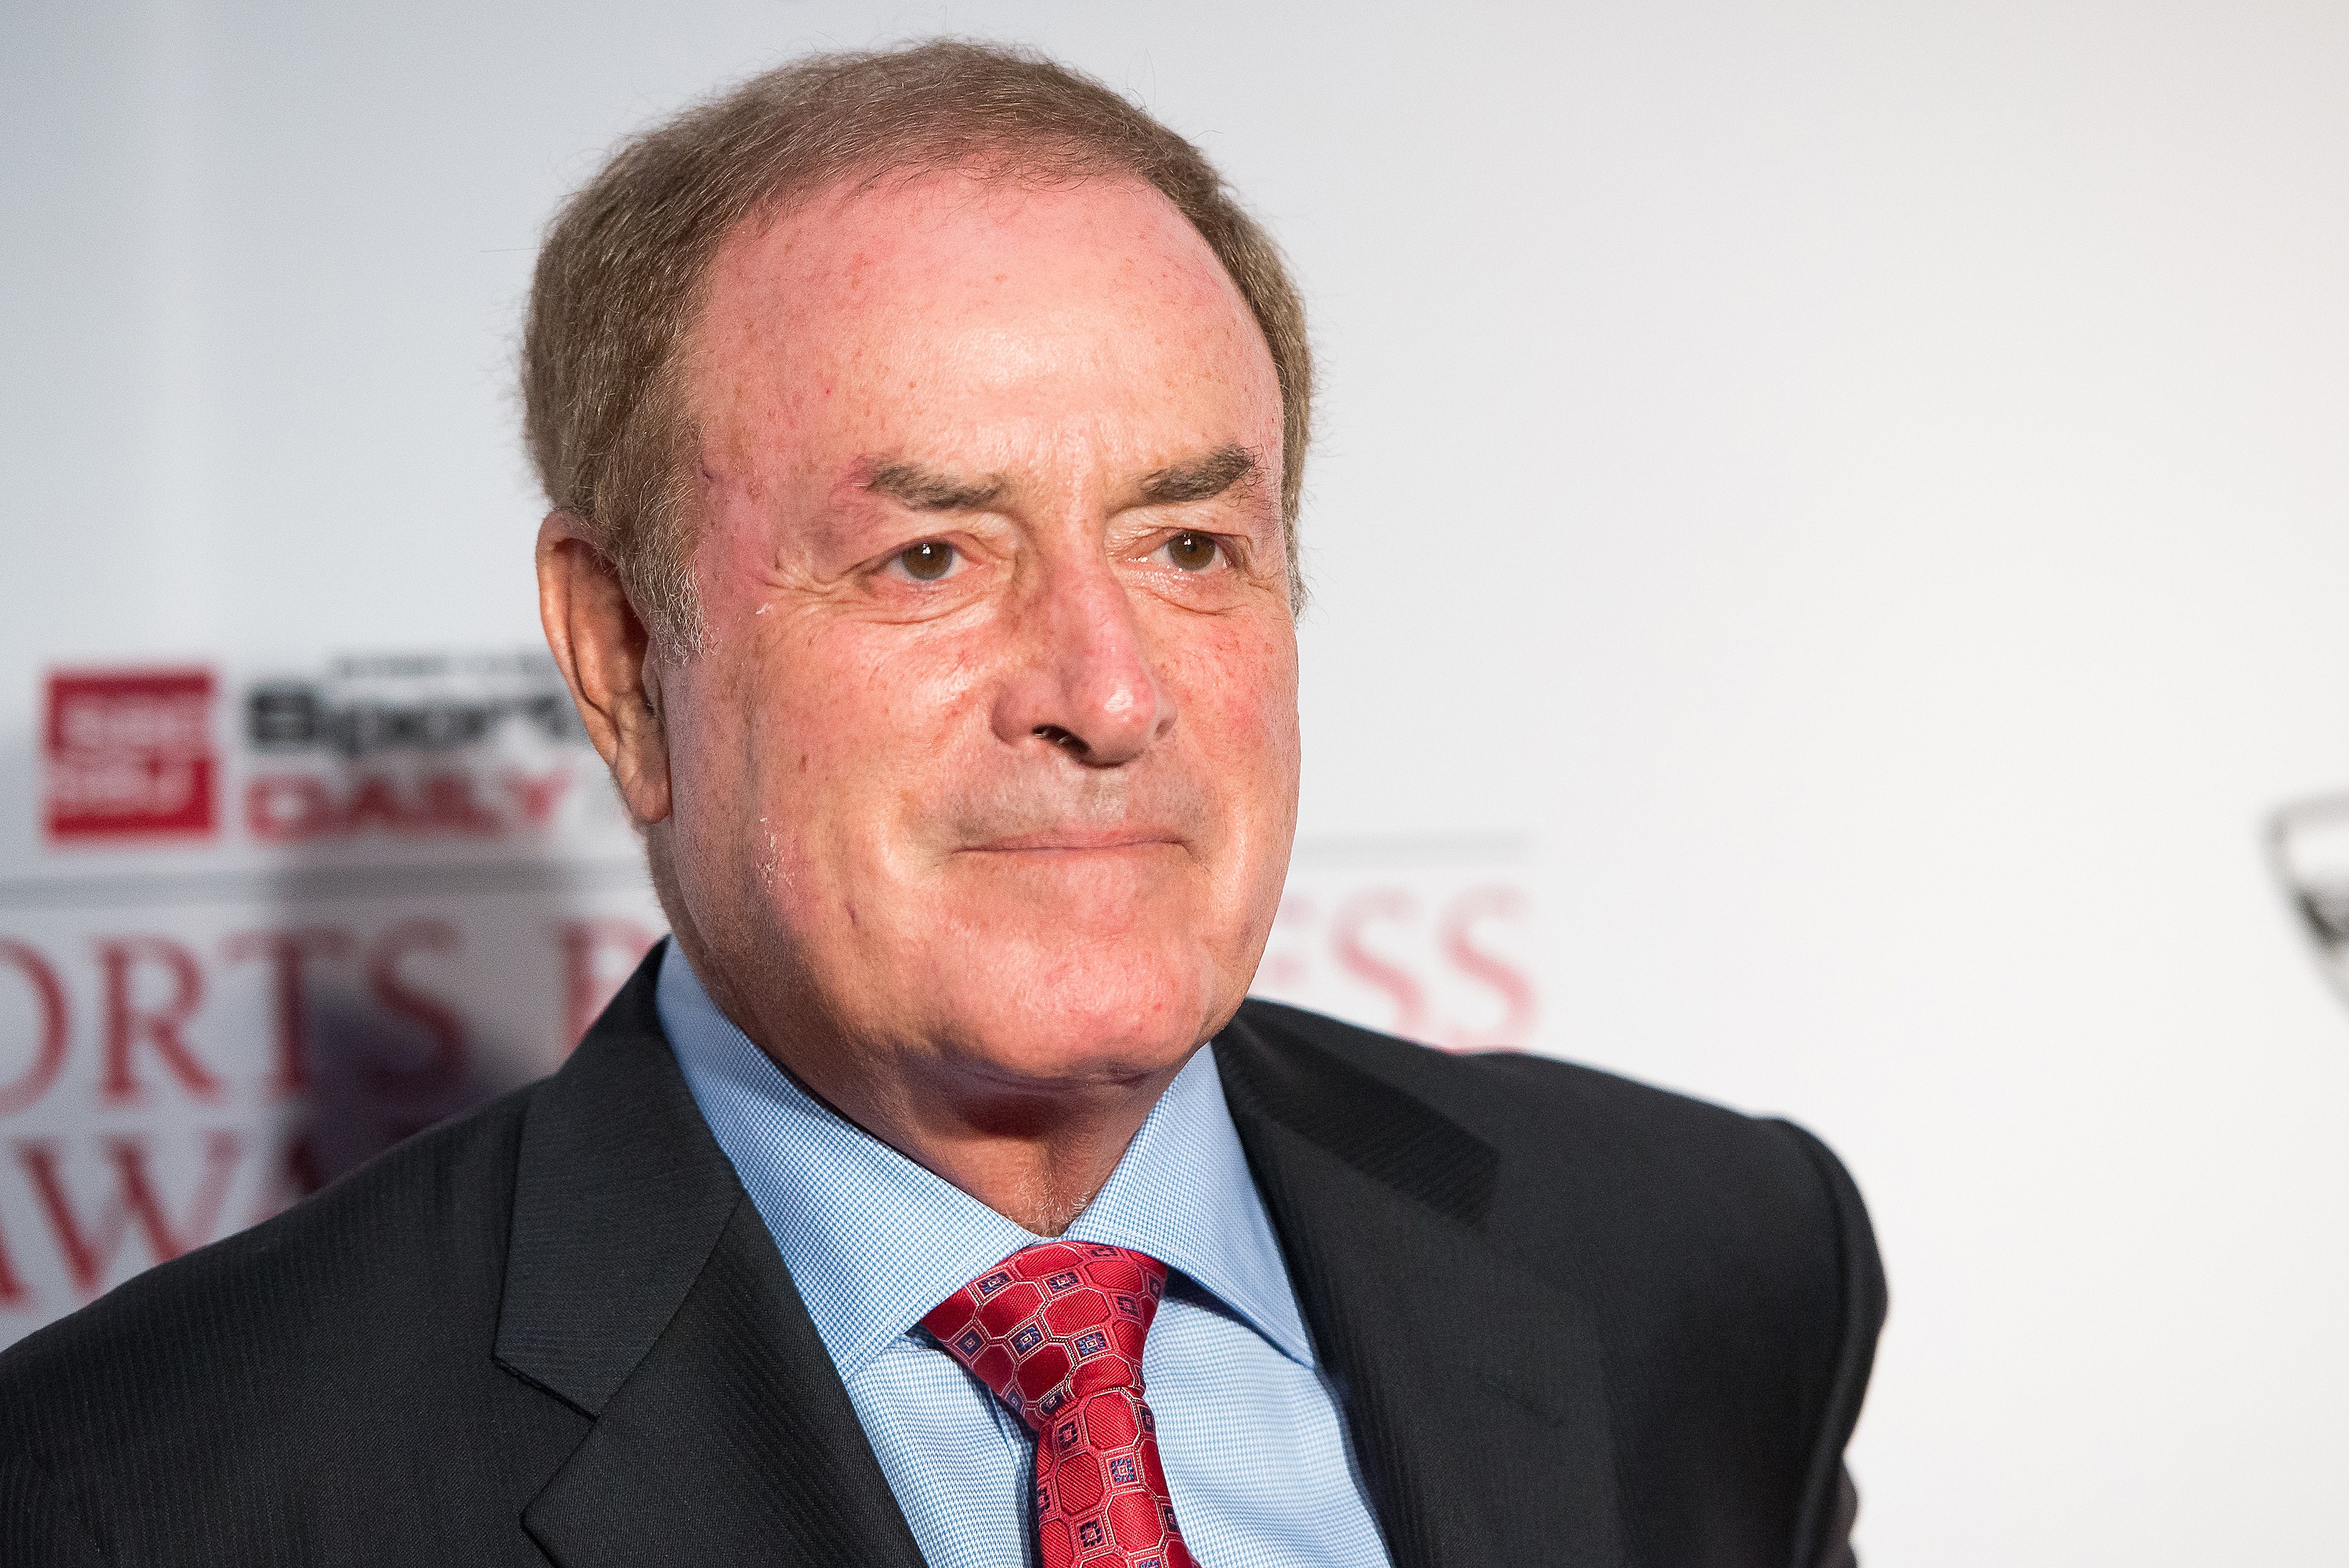 Al Michaels' first television job was very interesting.